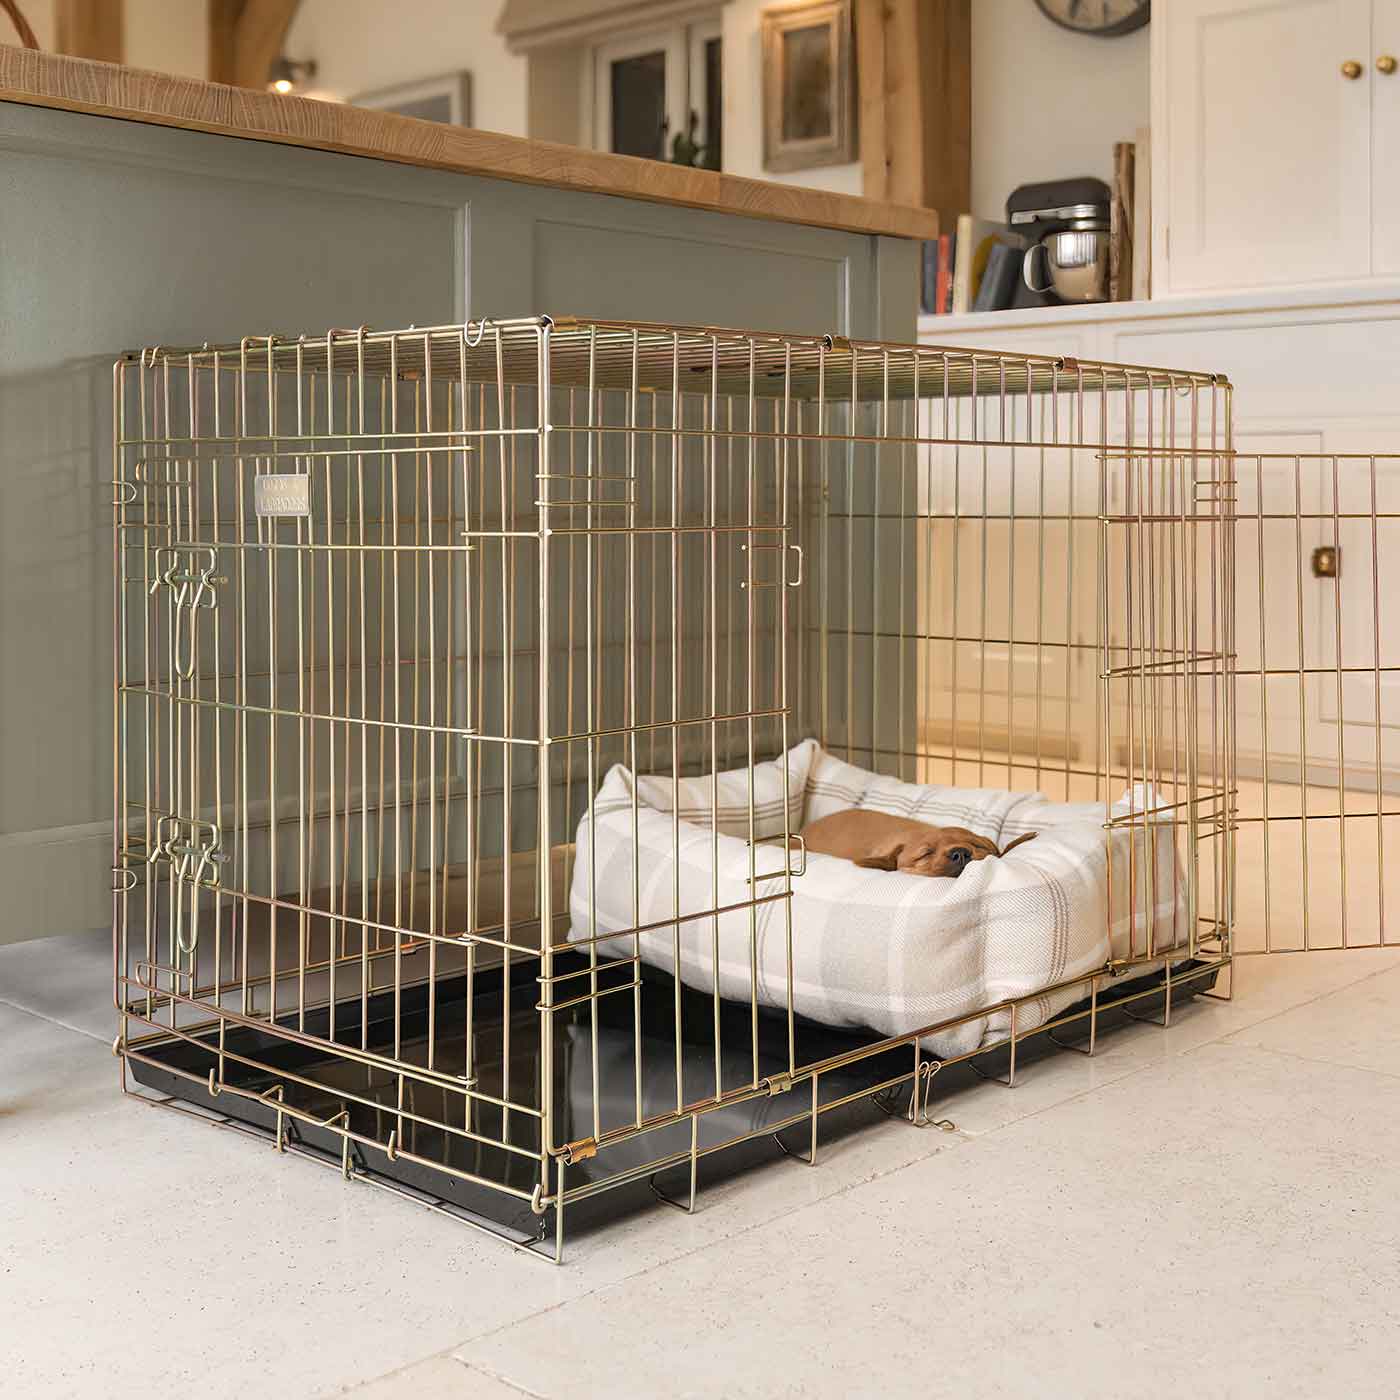 [color:natural tweed] Cozy & Calming Puppy Cage Bed, The Perfect Dog Cage Accessory For The Ultimate Dog Den! In Stunning Balmoral Natural Tweed! Now Available to Personalize at Lords & Labradors US